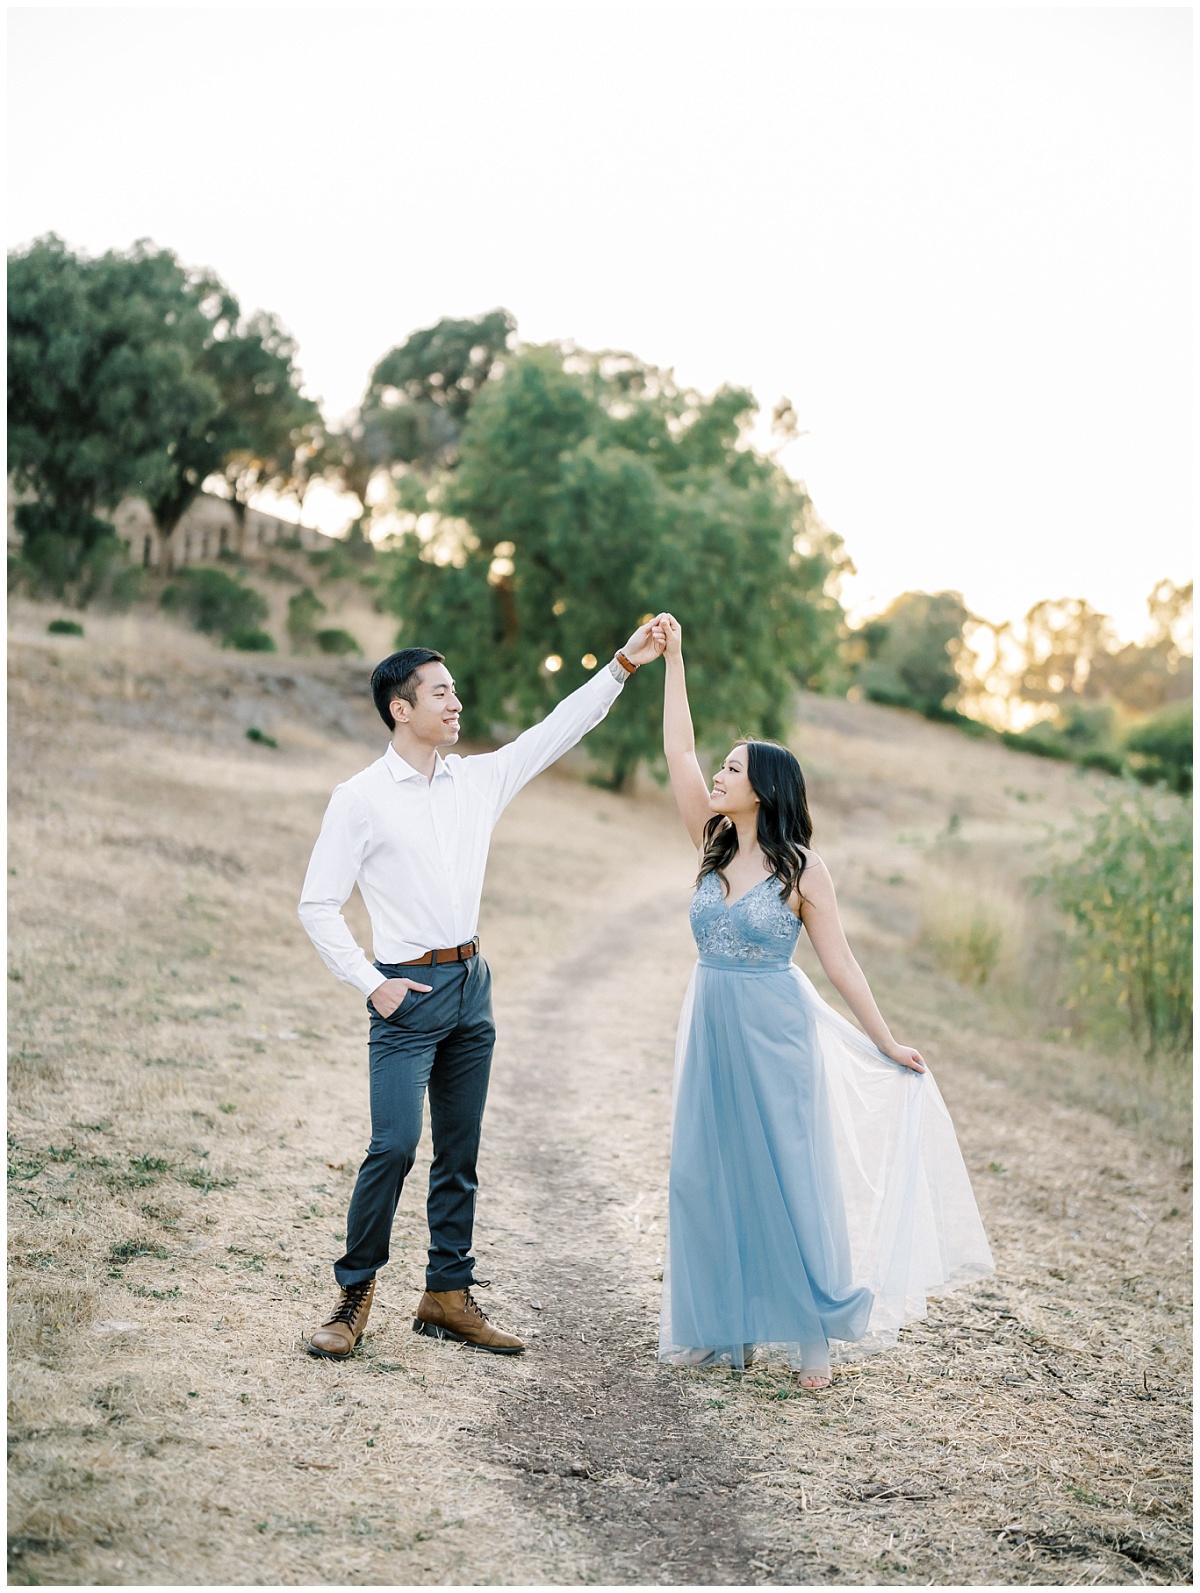 Twirl Posing Ideas for Couples